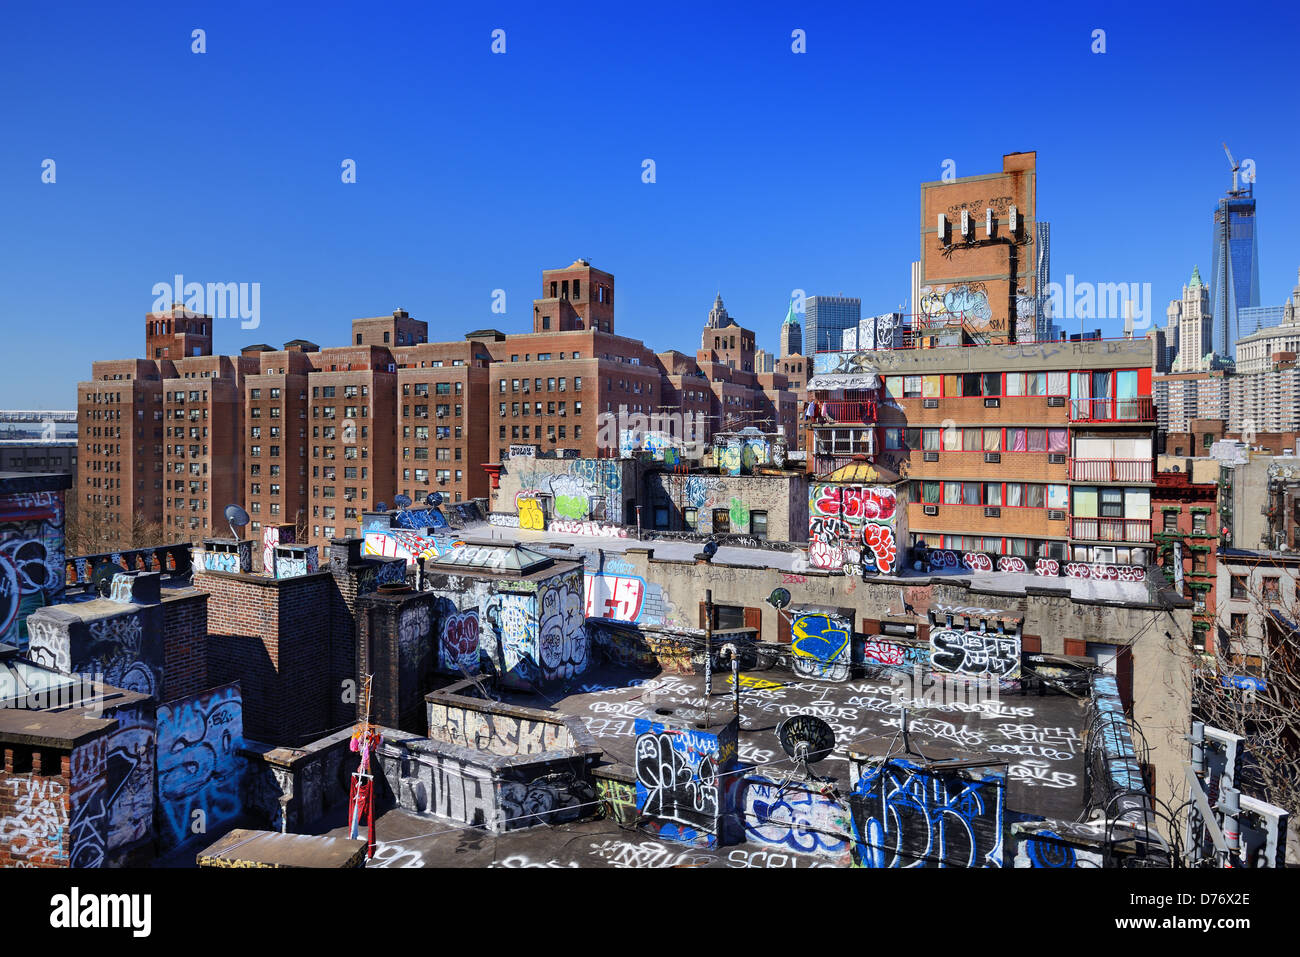 Gritty rooftops in the Lower East Side of Manhattan with graffiti. Stock Photo